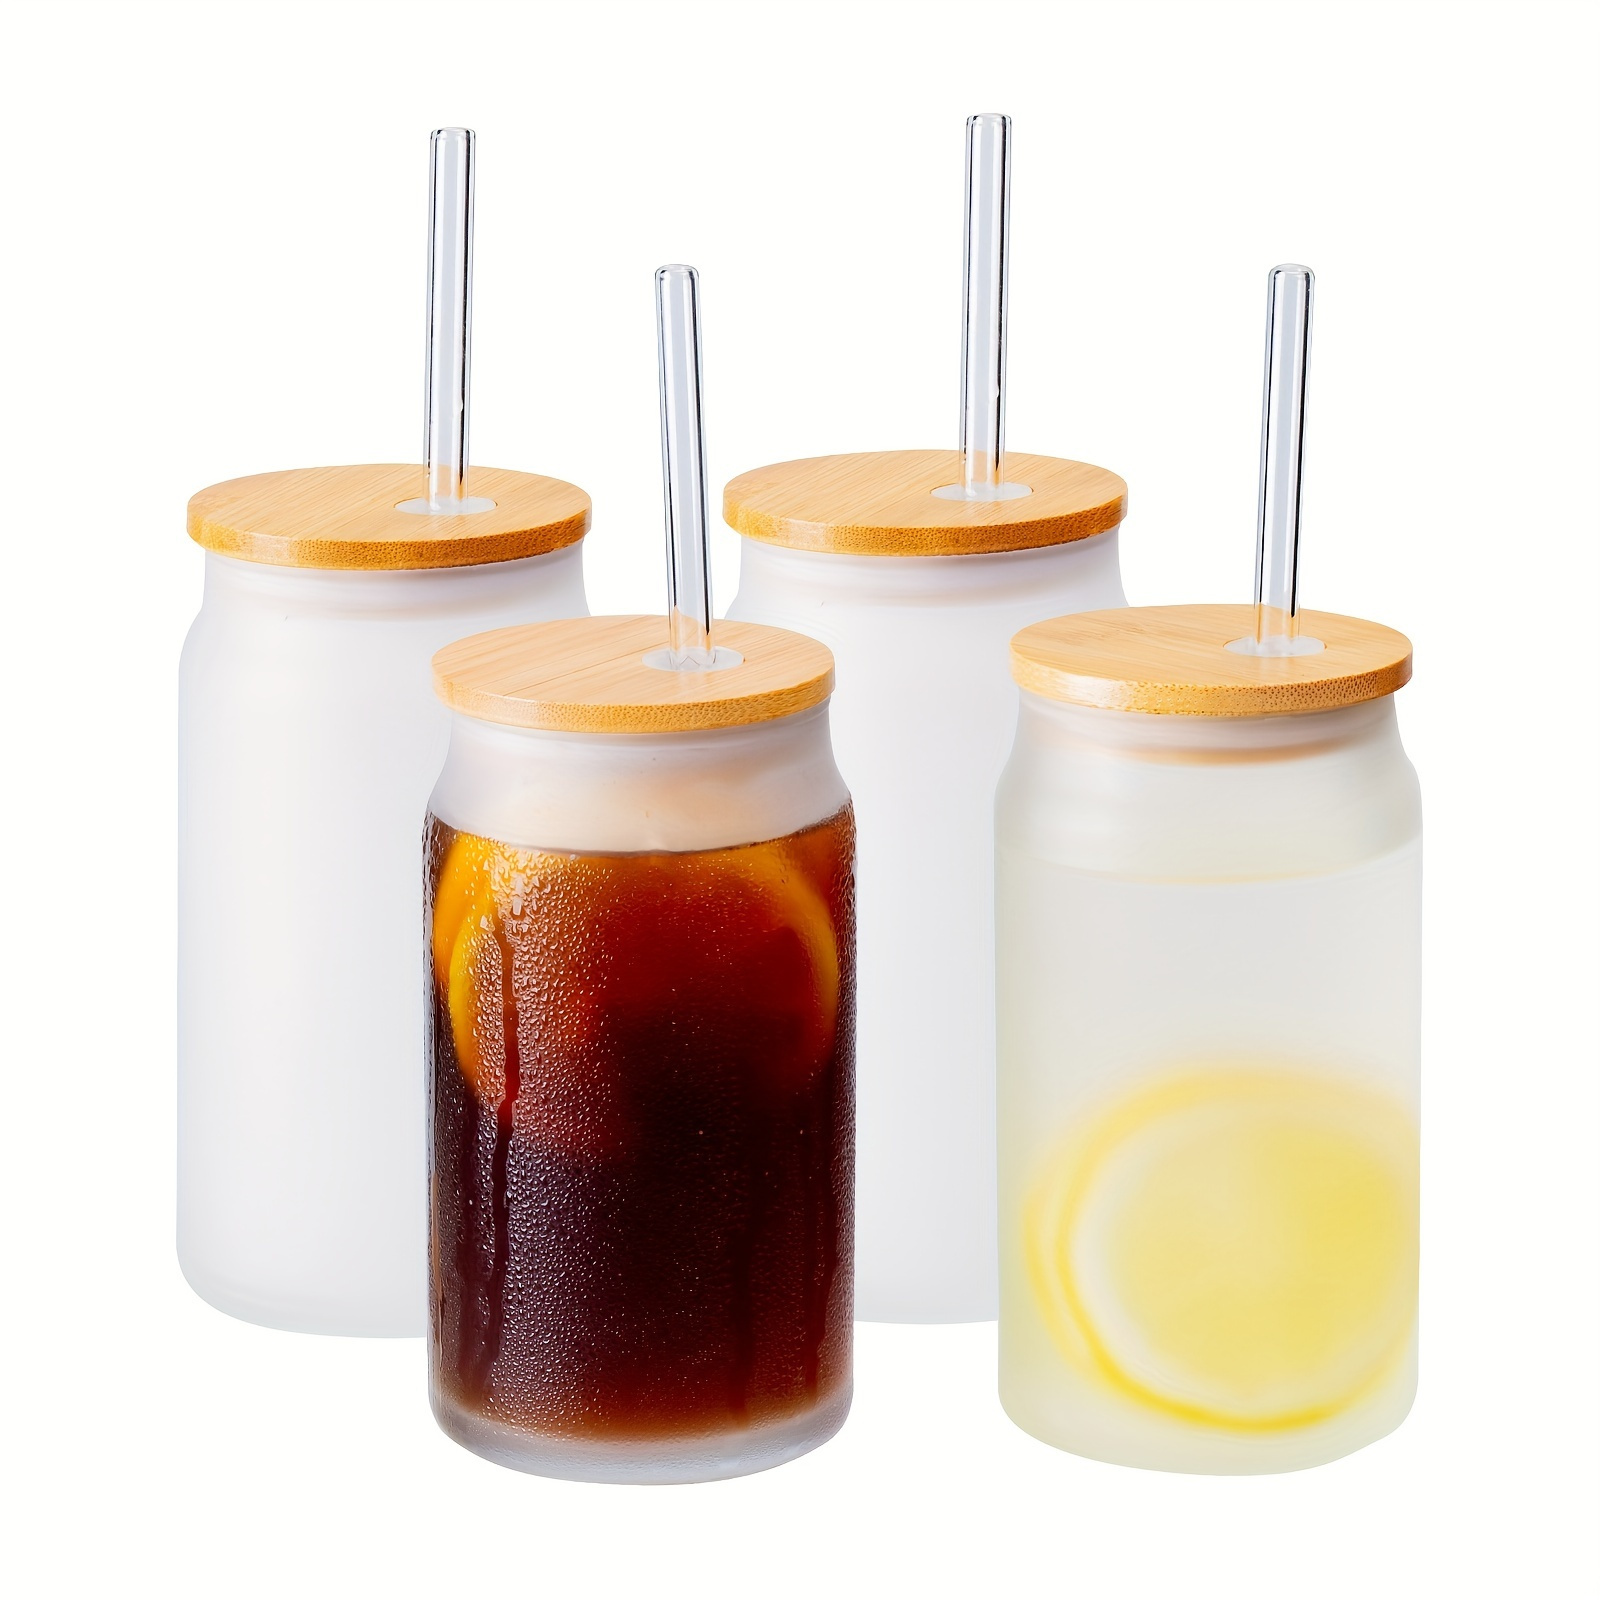 Drinking Glasses with Bamboo Lids and Glass Straw 4pcs Set -  16oz Can Shaped Glass Cups, Beer Glasses, Iced Coffee Glasses,- 2 Cleaning  Brushes, Drinking Glasses 4 pack 16 oz: Mixed Drinkware Sets